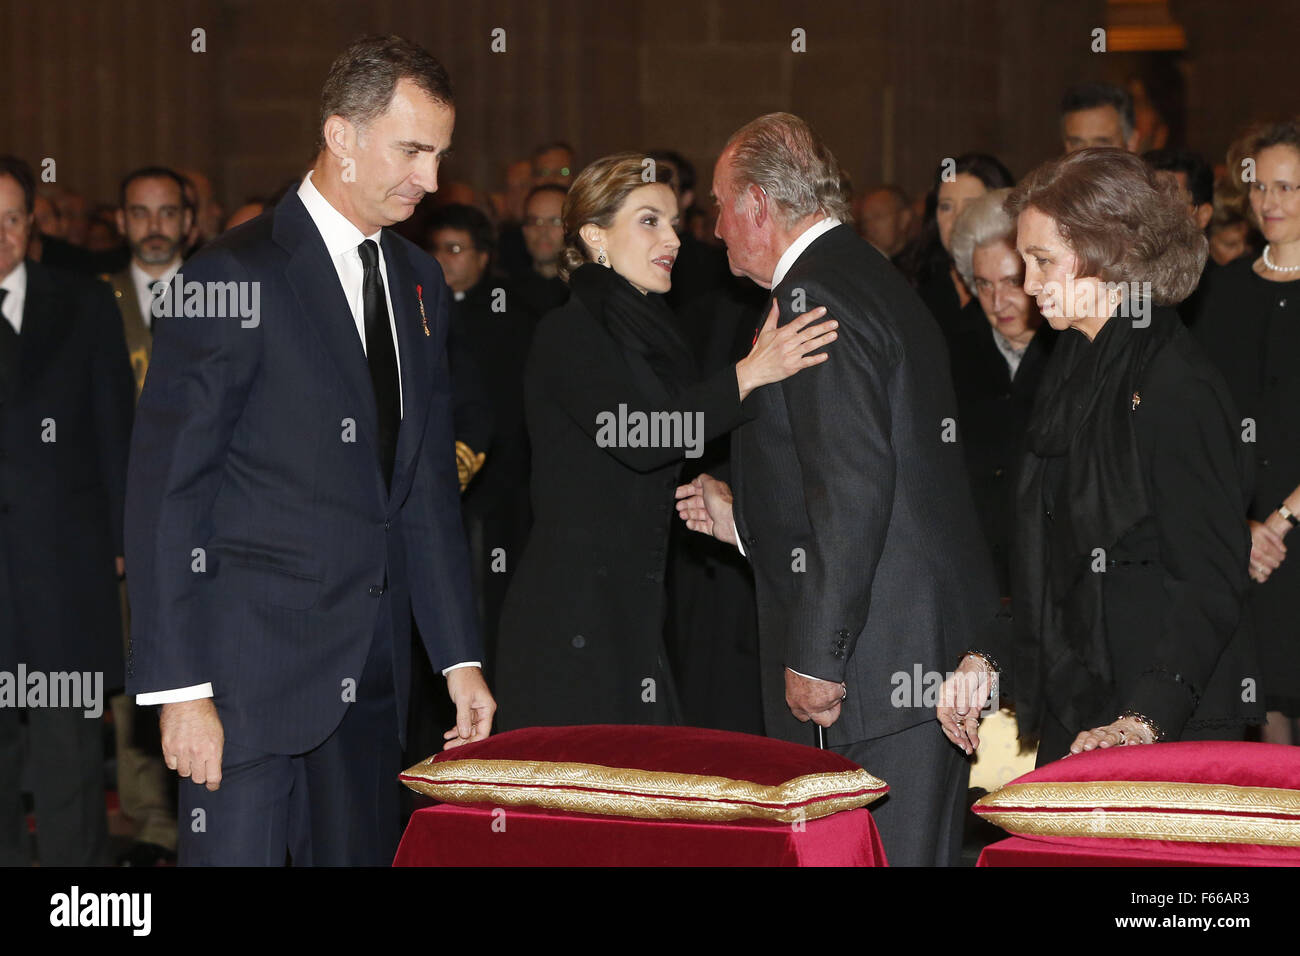 El Escorial, Spain. 12th Nov, 2015. King Juan Carlos of Spain, Queen Sofia of Spain, King Felipe VI of Spain and Queen Letizia of Spain attends the Funeral by His Royal Highness Infante Carlos, Duke of Calabria, Prince of Spain, at San Lorenzo de El Escorial Monastery on November 12, 2015 in El Escorial, Madrid, Spain © Jack Abuin/ZUMA Wire/Alamy Live News Stock Photo